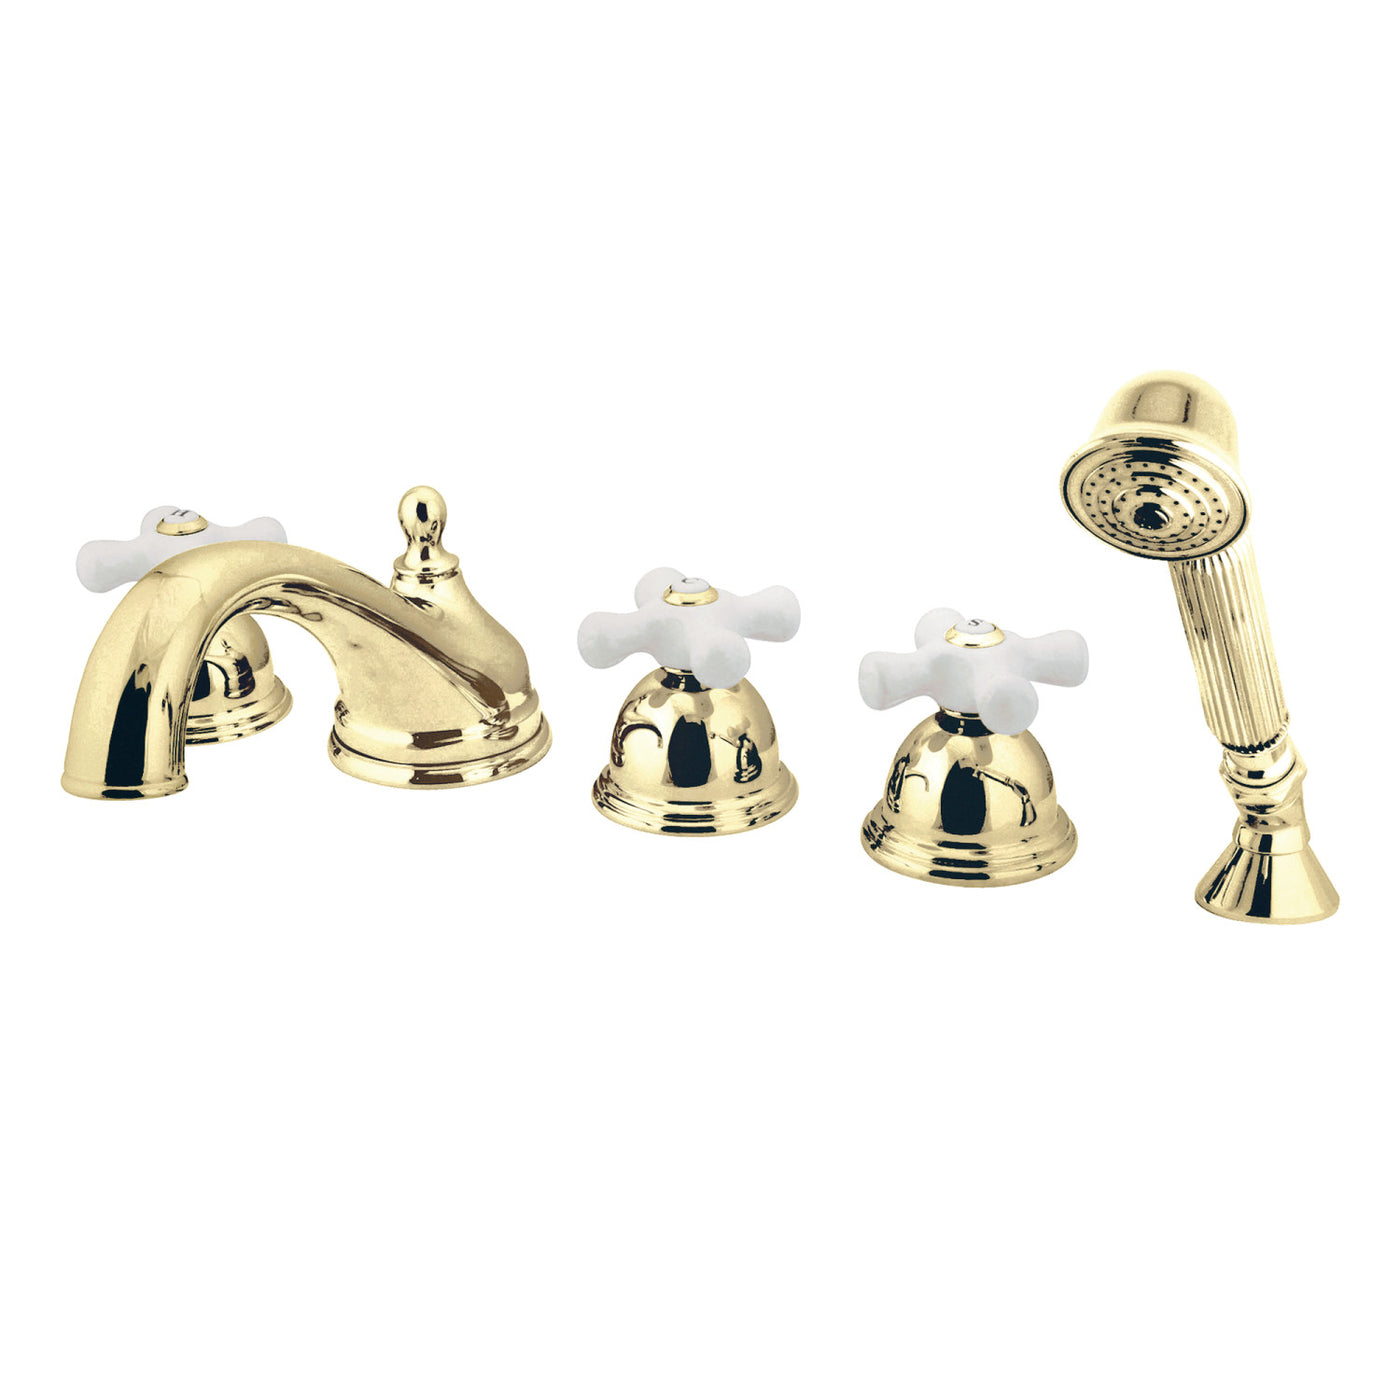 Elements of Design ES33525PX Roman Tub Faucet with Hand Shower, Polished Brass